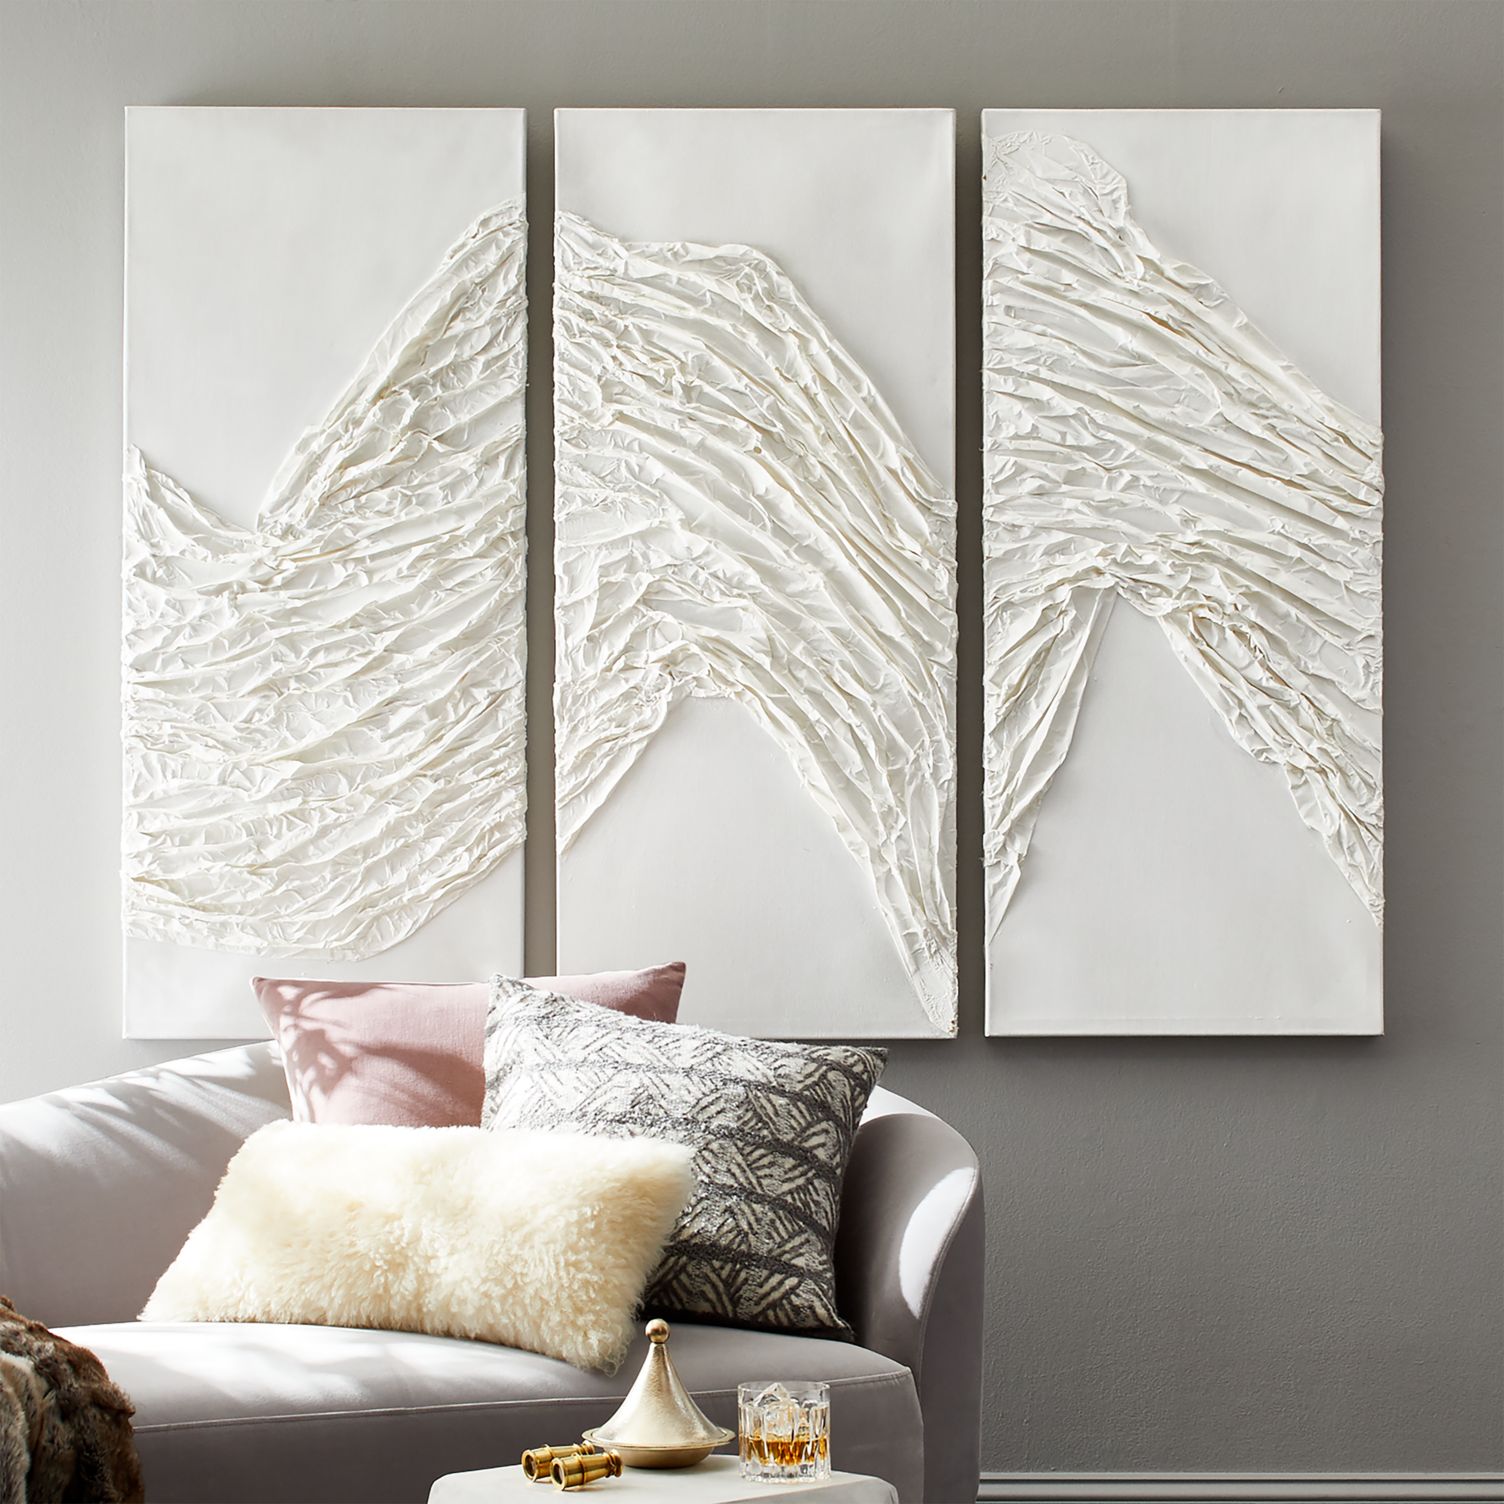 Textured wall art from CB2